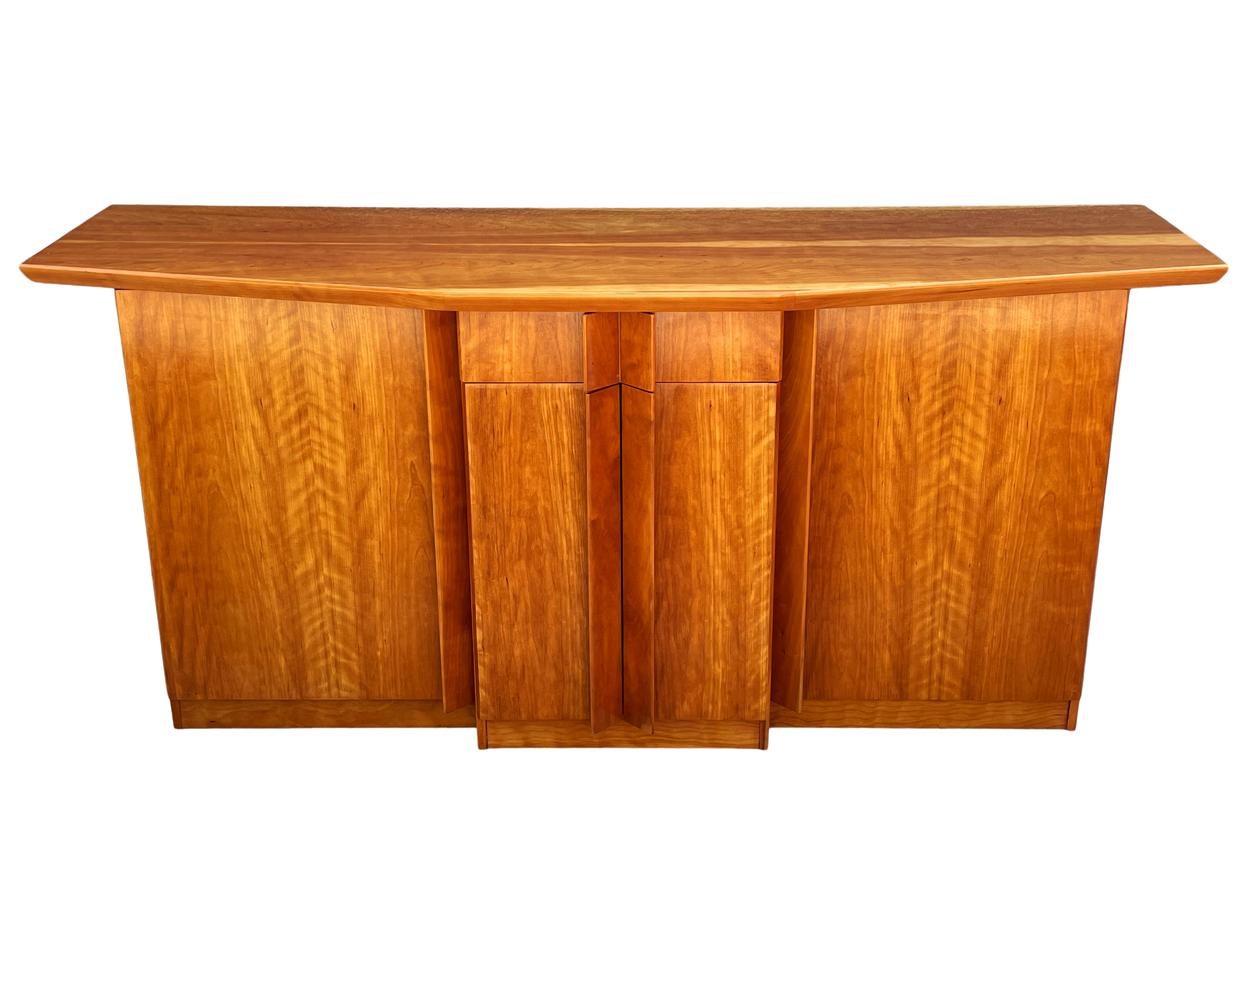 Late 20th Century Mid Century Danish Modern Credenza or Cabinet in Cherry Wood For Sale